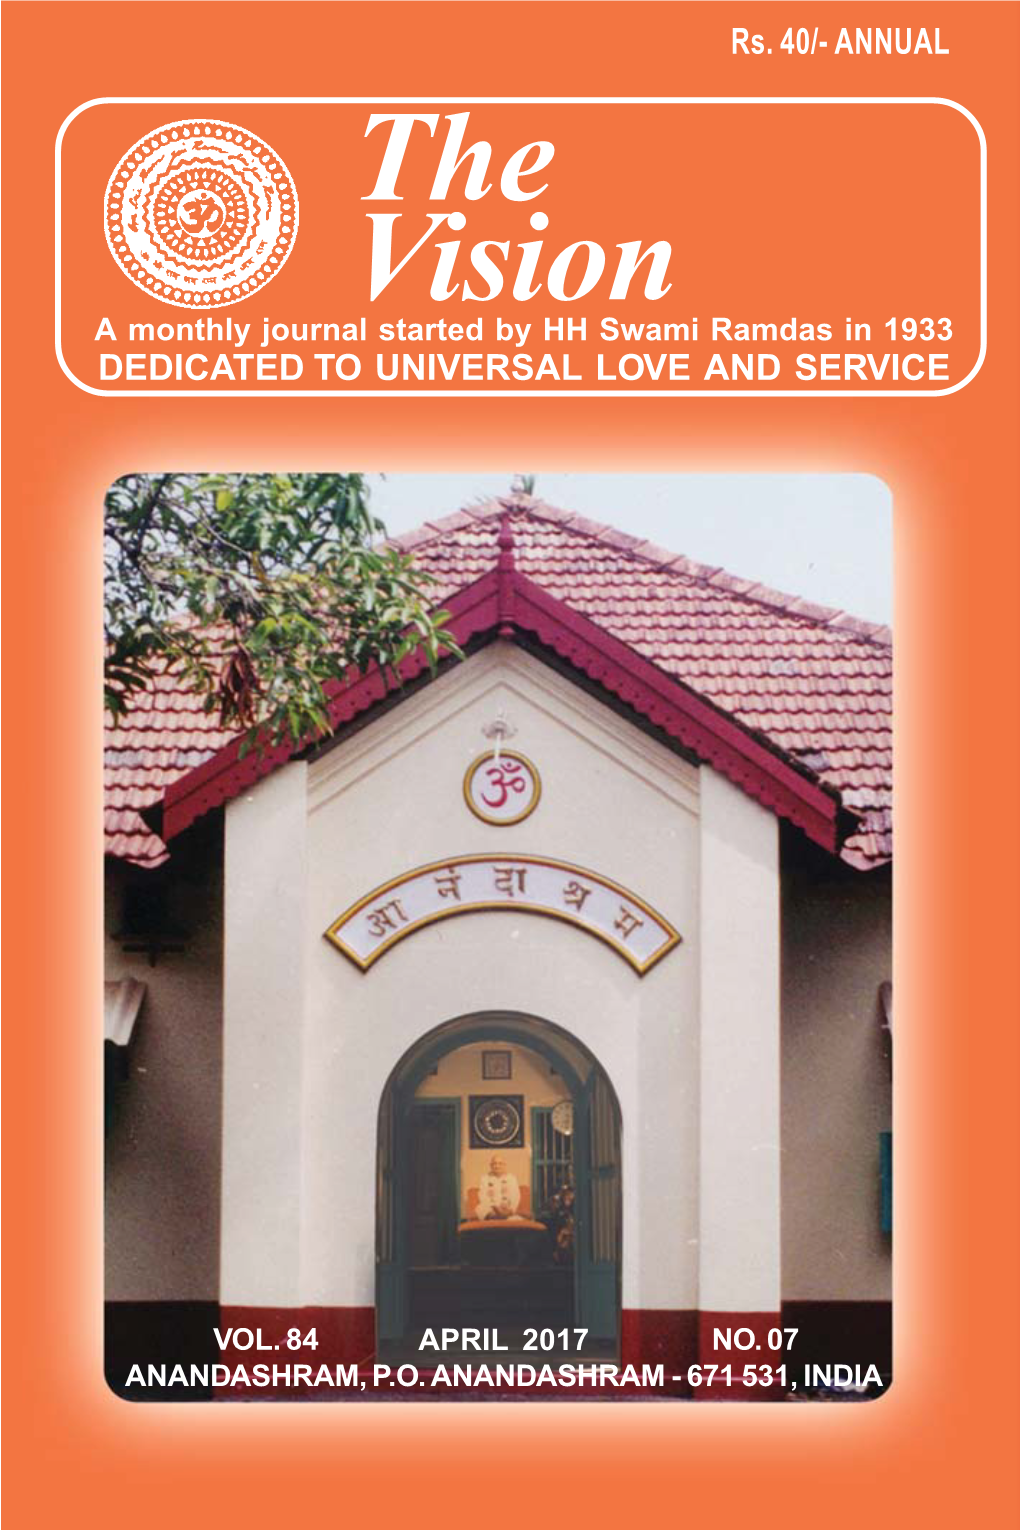 The Vision a Monthly Journal Started by HH Swami Ramdas in 1933 DEDICATED to UNIVERSAL LOVE and SERVICE